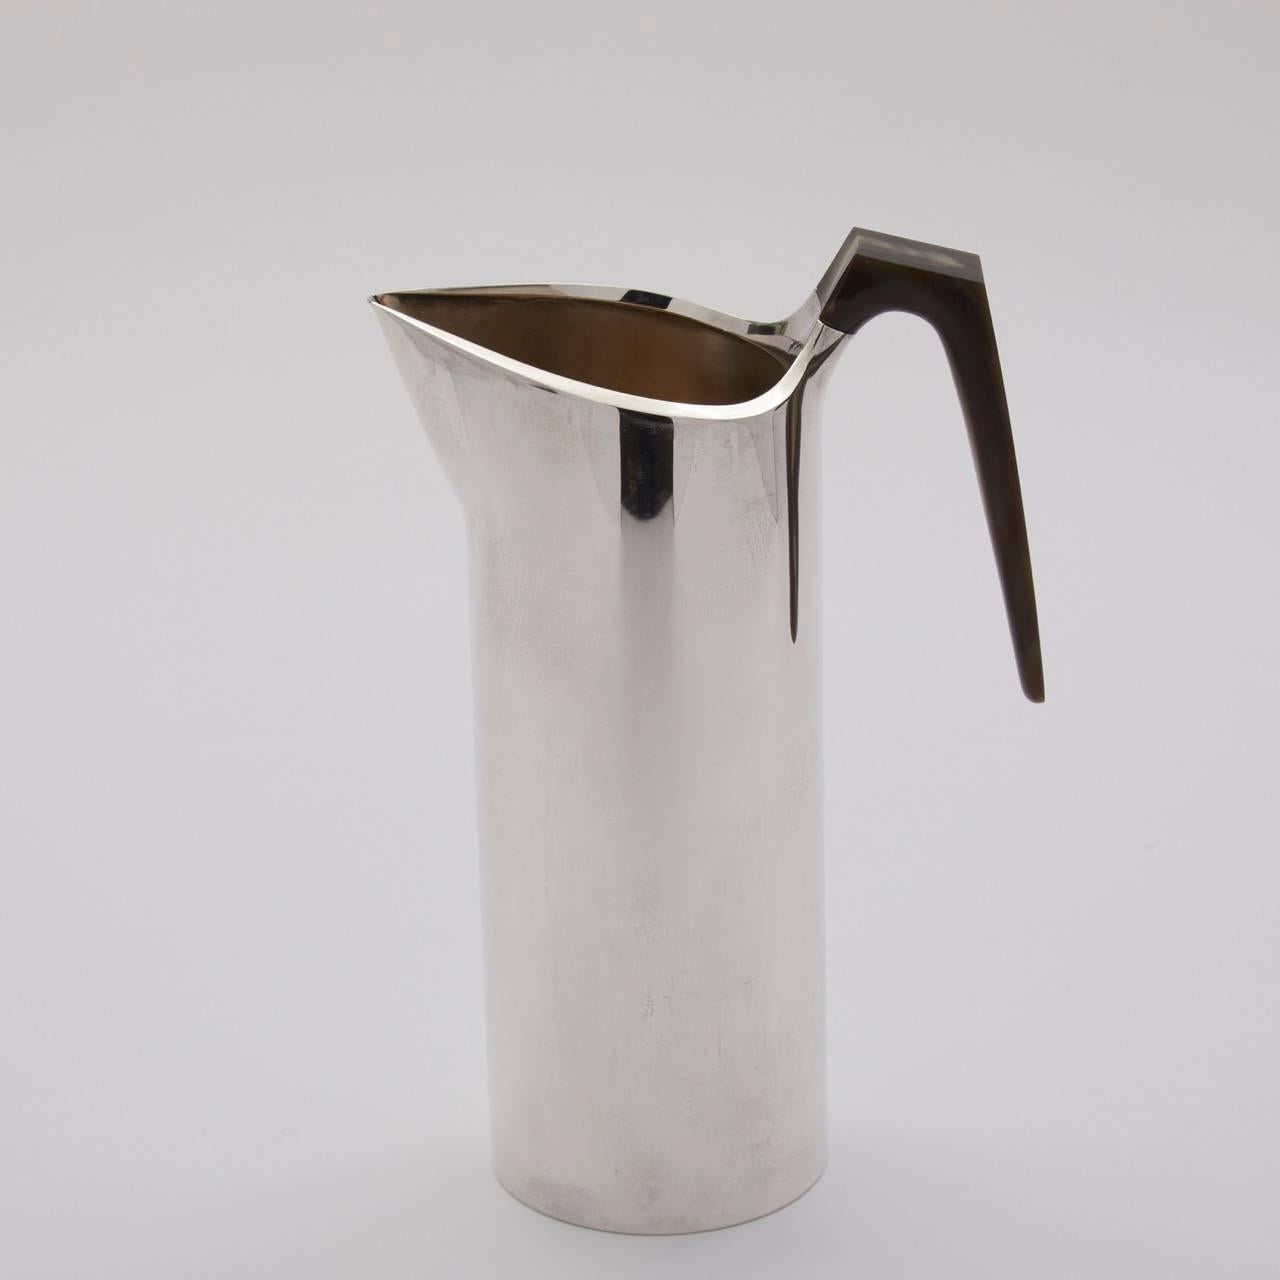 Hans Hansen sterling silver drinks pitcher

Wonderful and bold pitcher made as a limited edition in 1989. Straight cylindrical body with angle cut polished horn handle. Very sleek.

About the designer:
Hans Hansen (1884-1940) opened his own